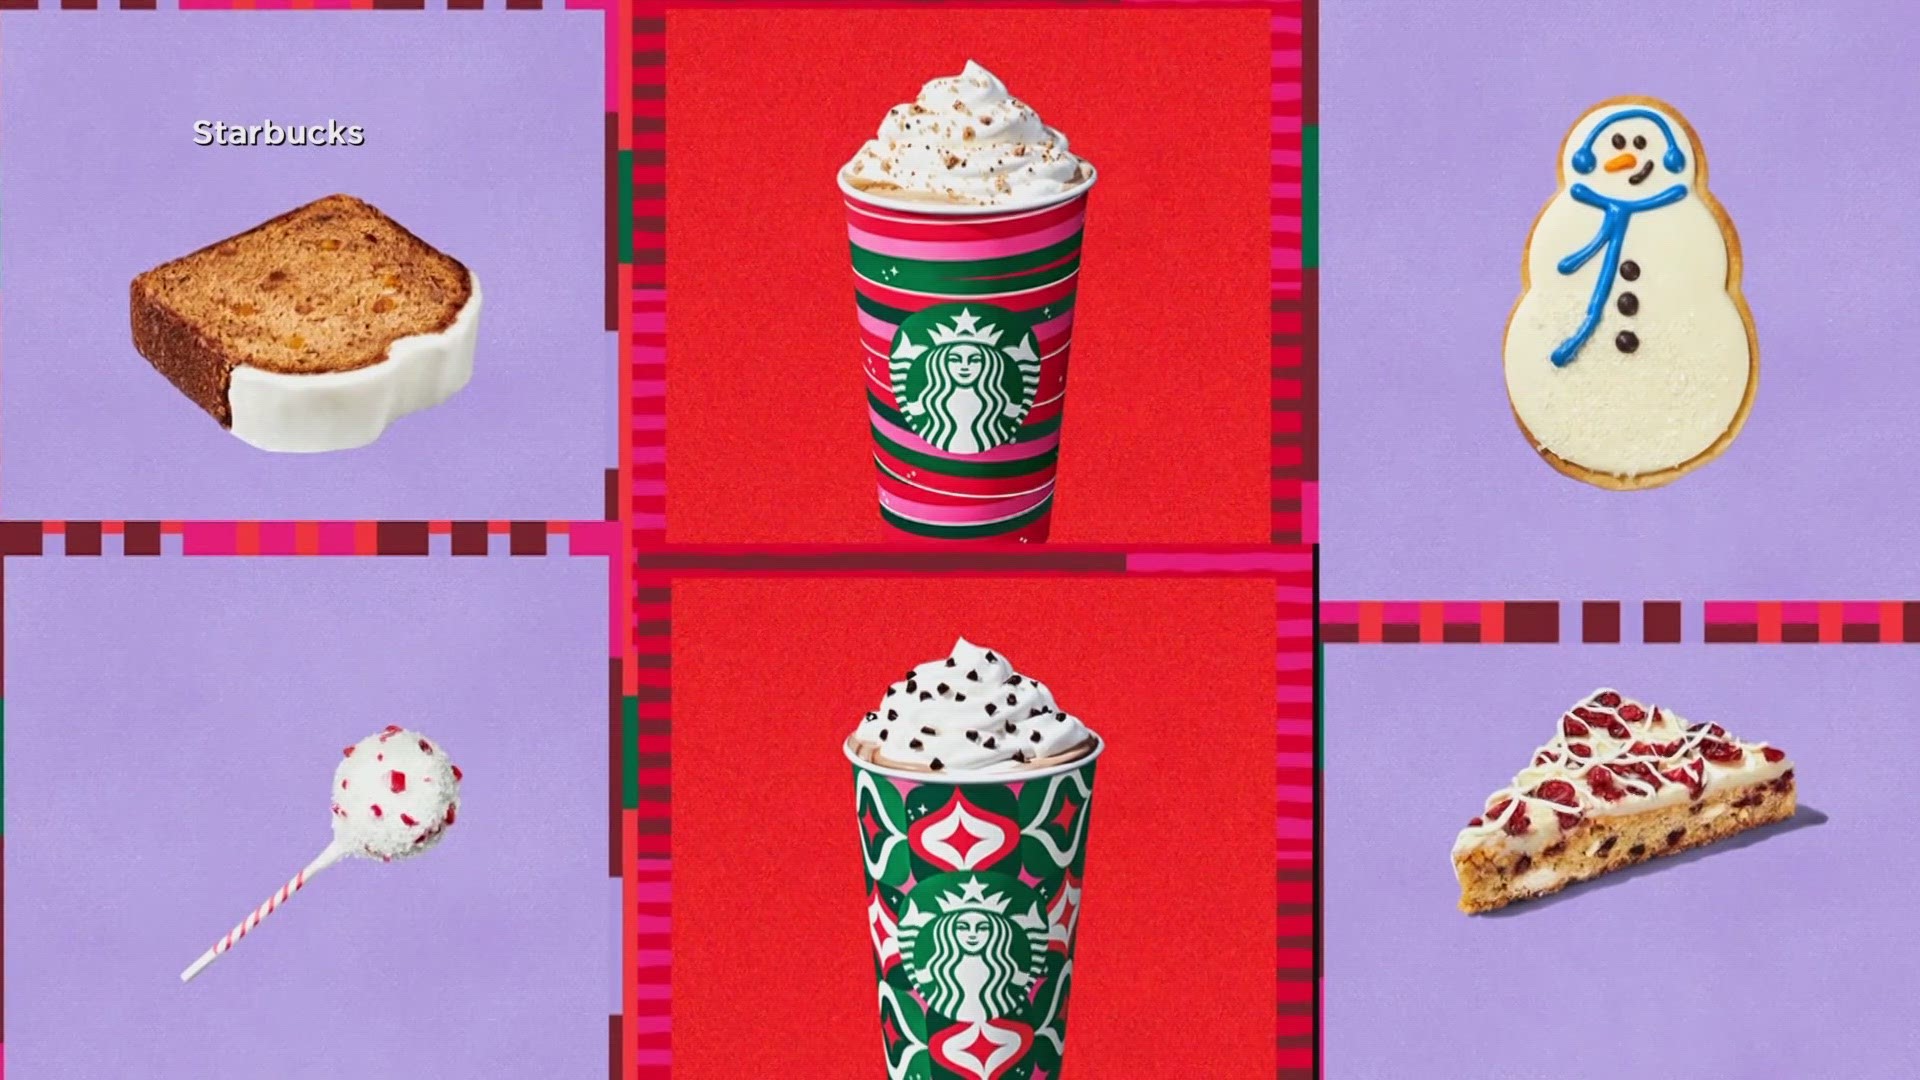 Starbucks Japan serves up 'Merry Cream' in its new Christmas